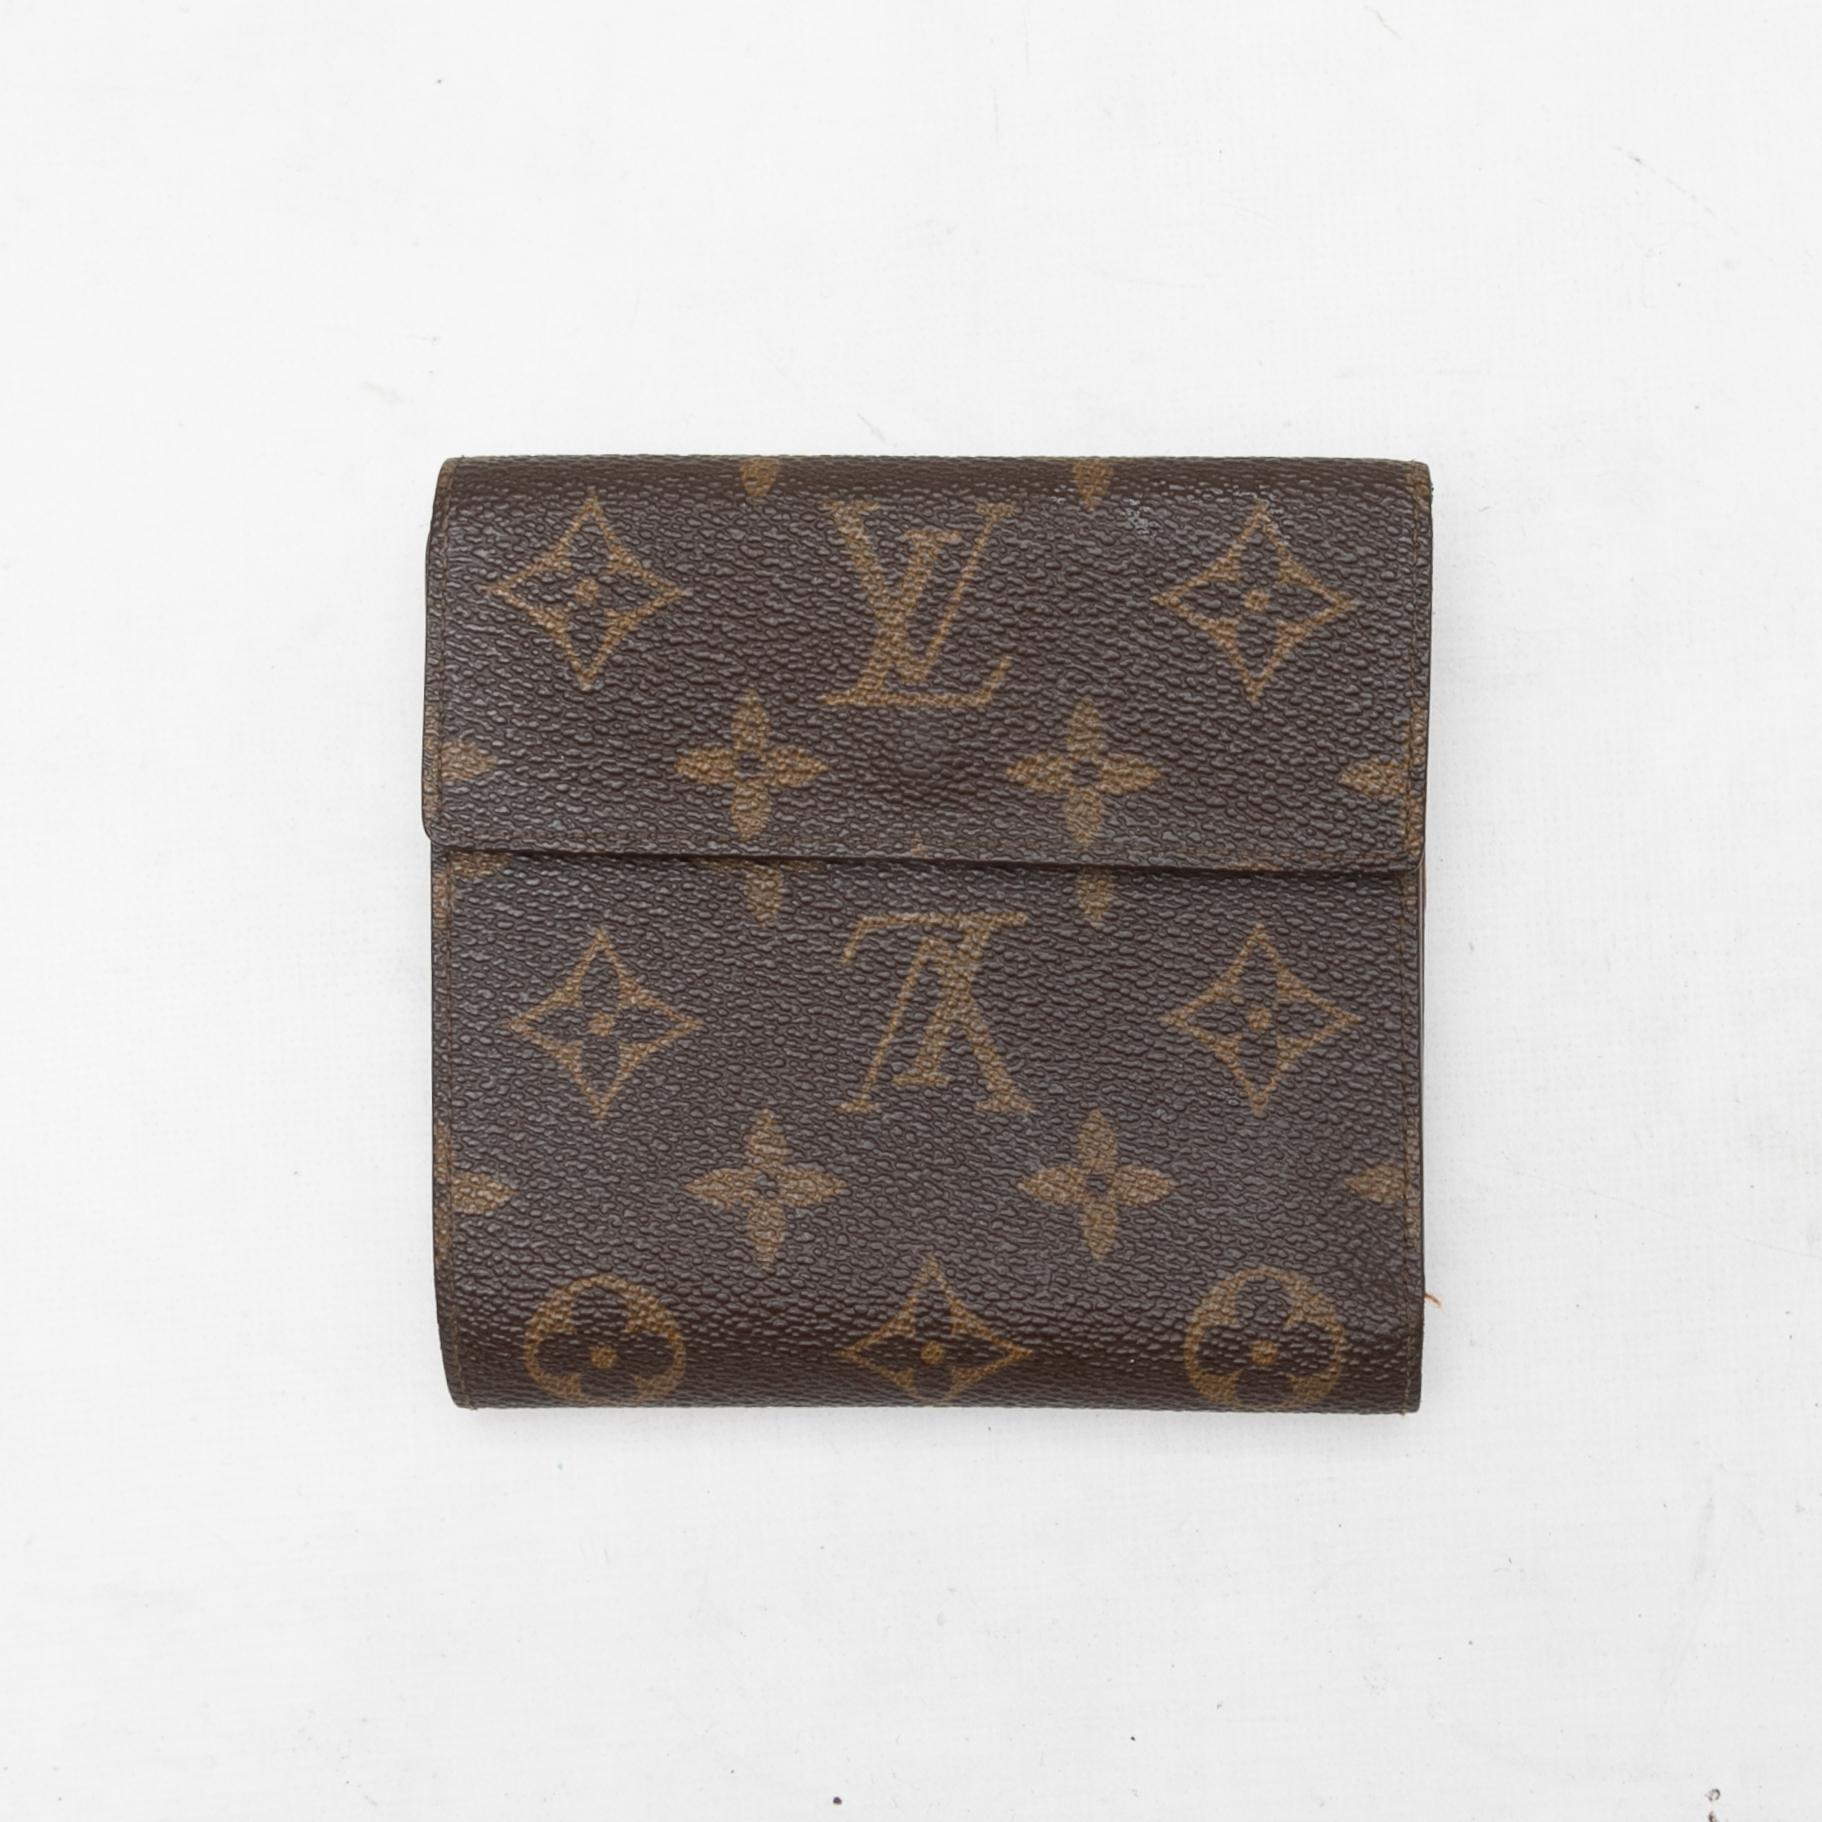 Brown monogram folding wallet by Louis Vuitton. Interior card and cash slots. Exterior snap closure. 4.5